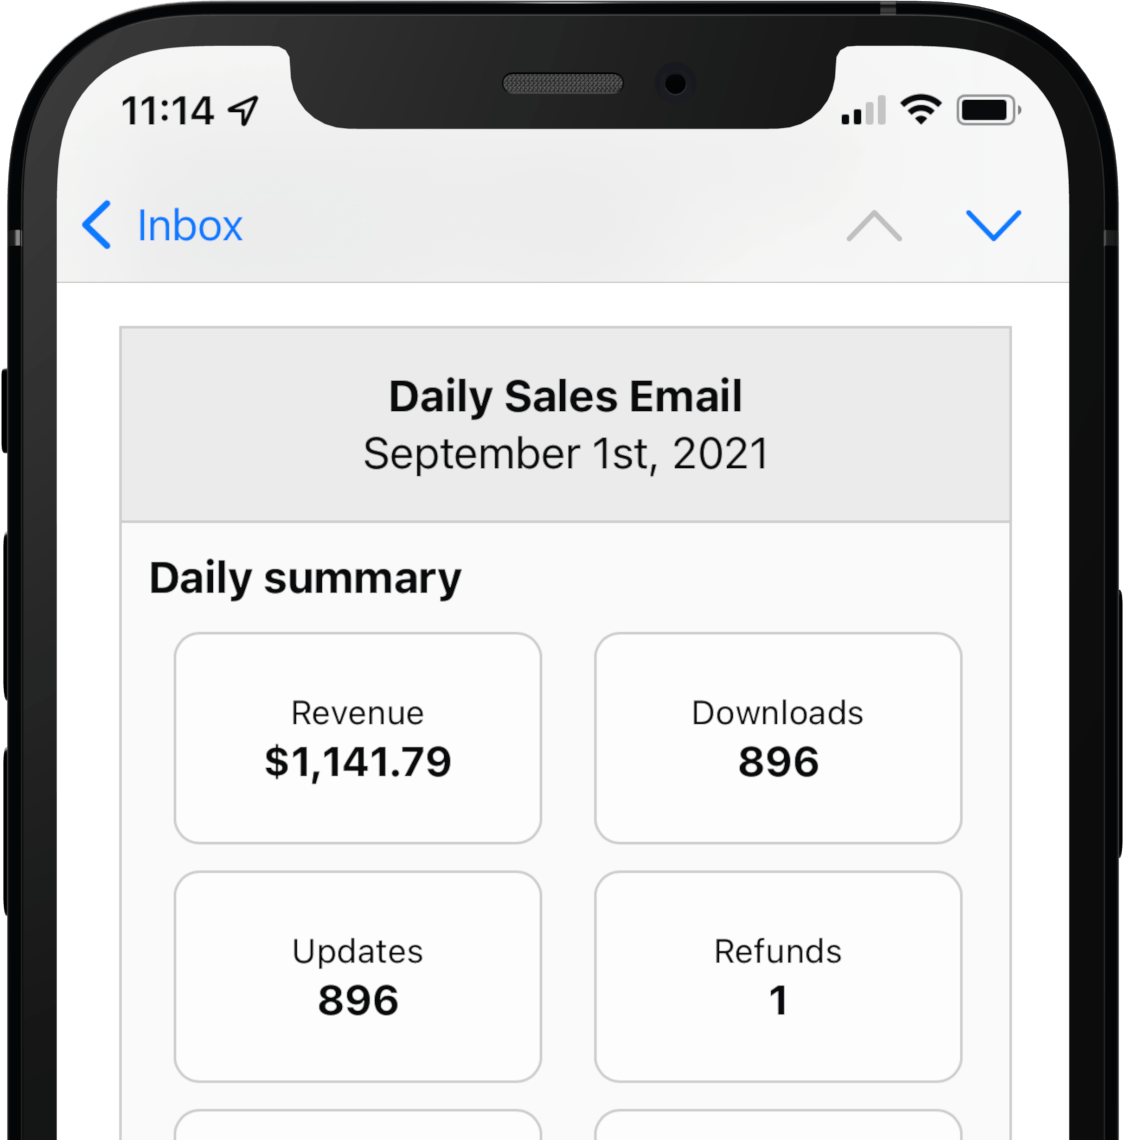 Daily Sales Email media 1